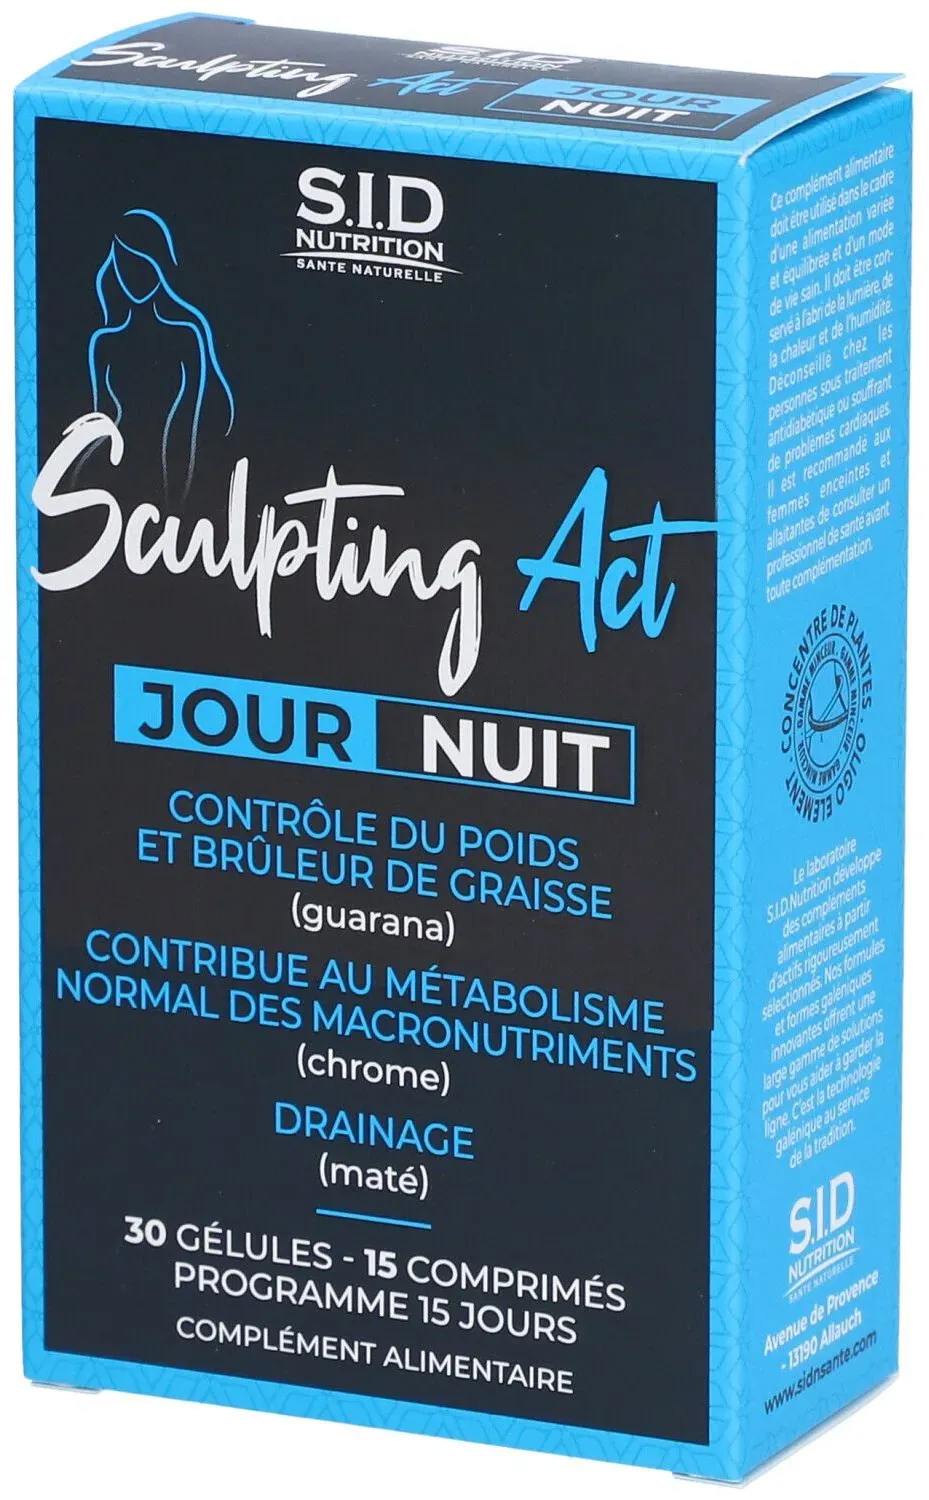 SIDN SCULPTING ACT JOUR/NUIT 15JRS 45 pc(s) emballage(s) combi